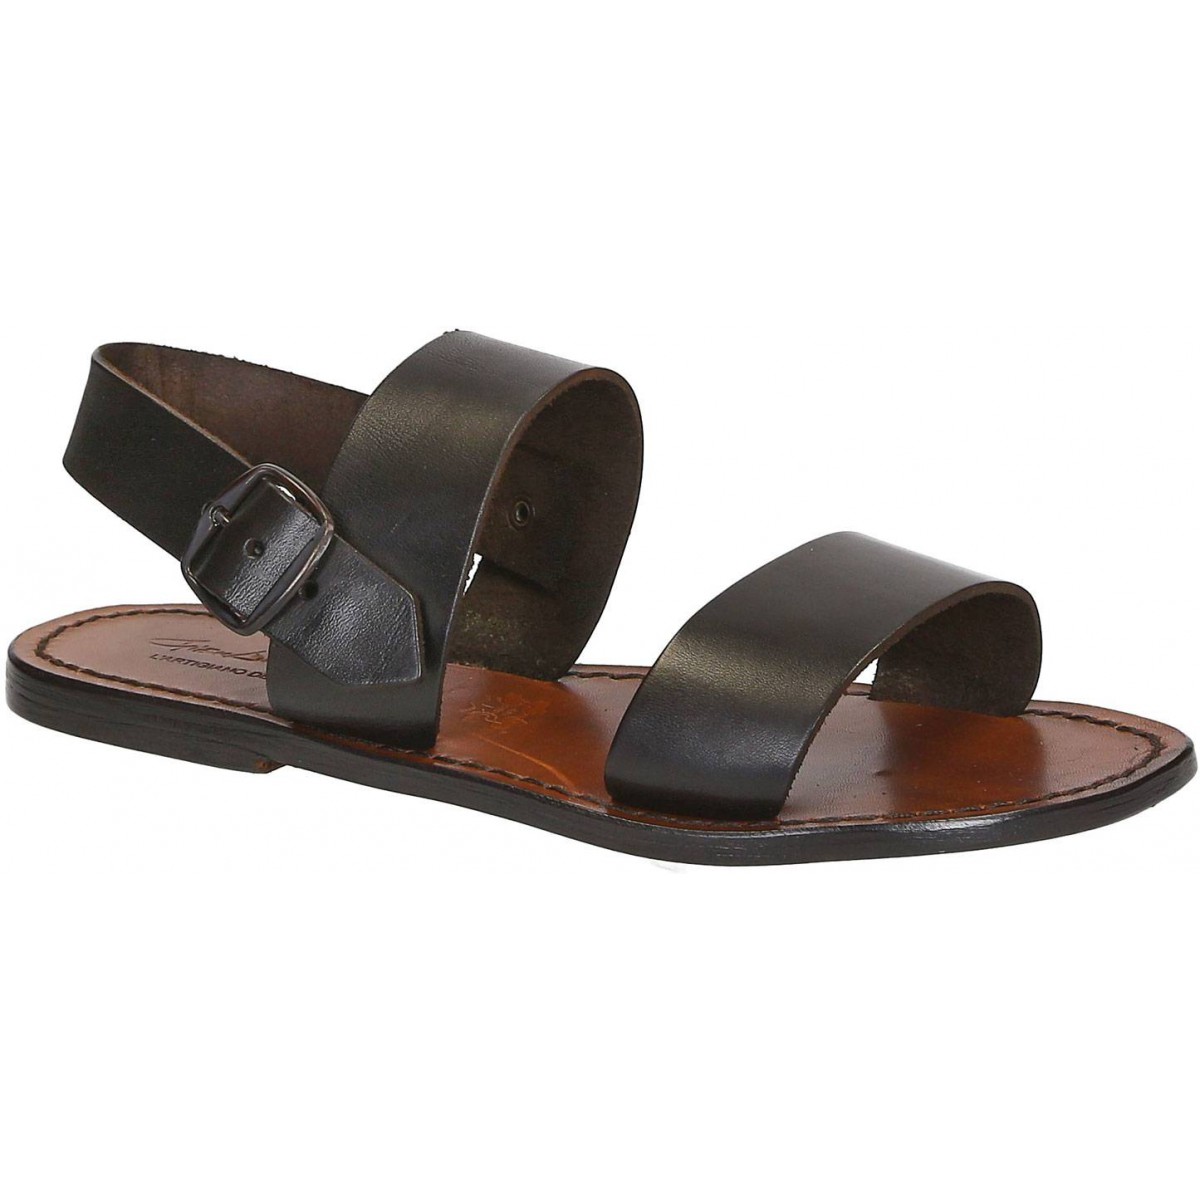 leather sandals women's sandals leather handmade leather sandals real leather made in italy